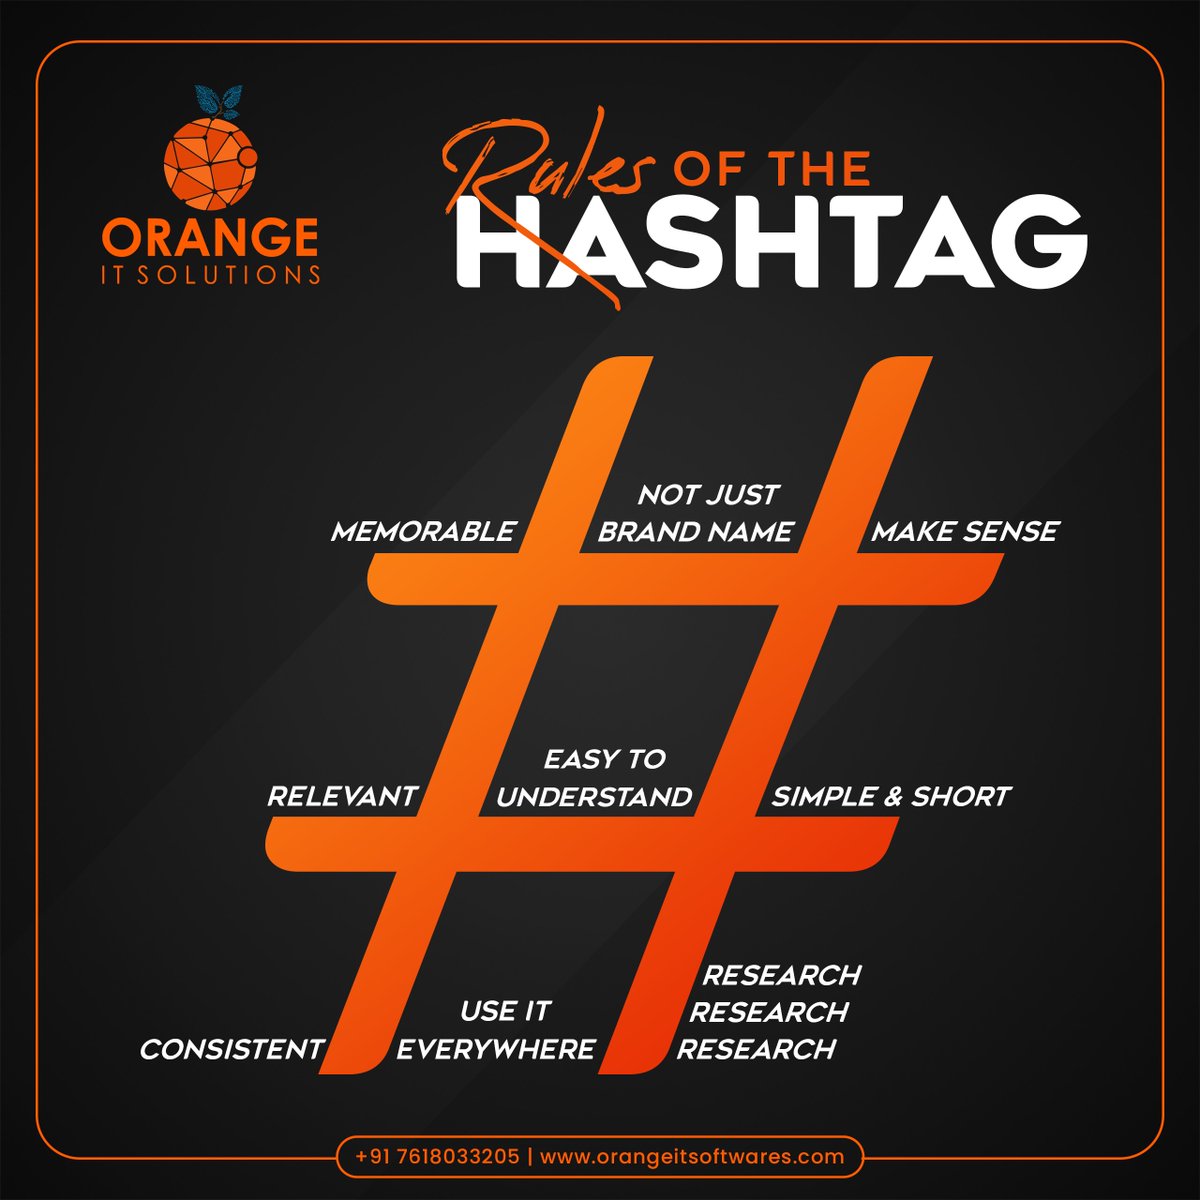 Elevate Your Online Presence with the Power of Hashtags!Ever wondered why some hashtags skyrocket while others barely lift off?
#SocialMediaAgency #HashtagStrategy #DigitalMarketingServices #OrangeITSolutions #ExplorePage #Lucknow #Kanpur #Gorakhpur #CorporateLife #BusinessOwner